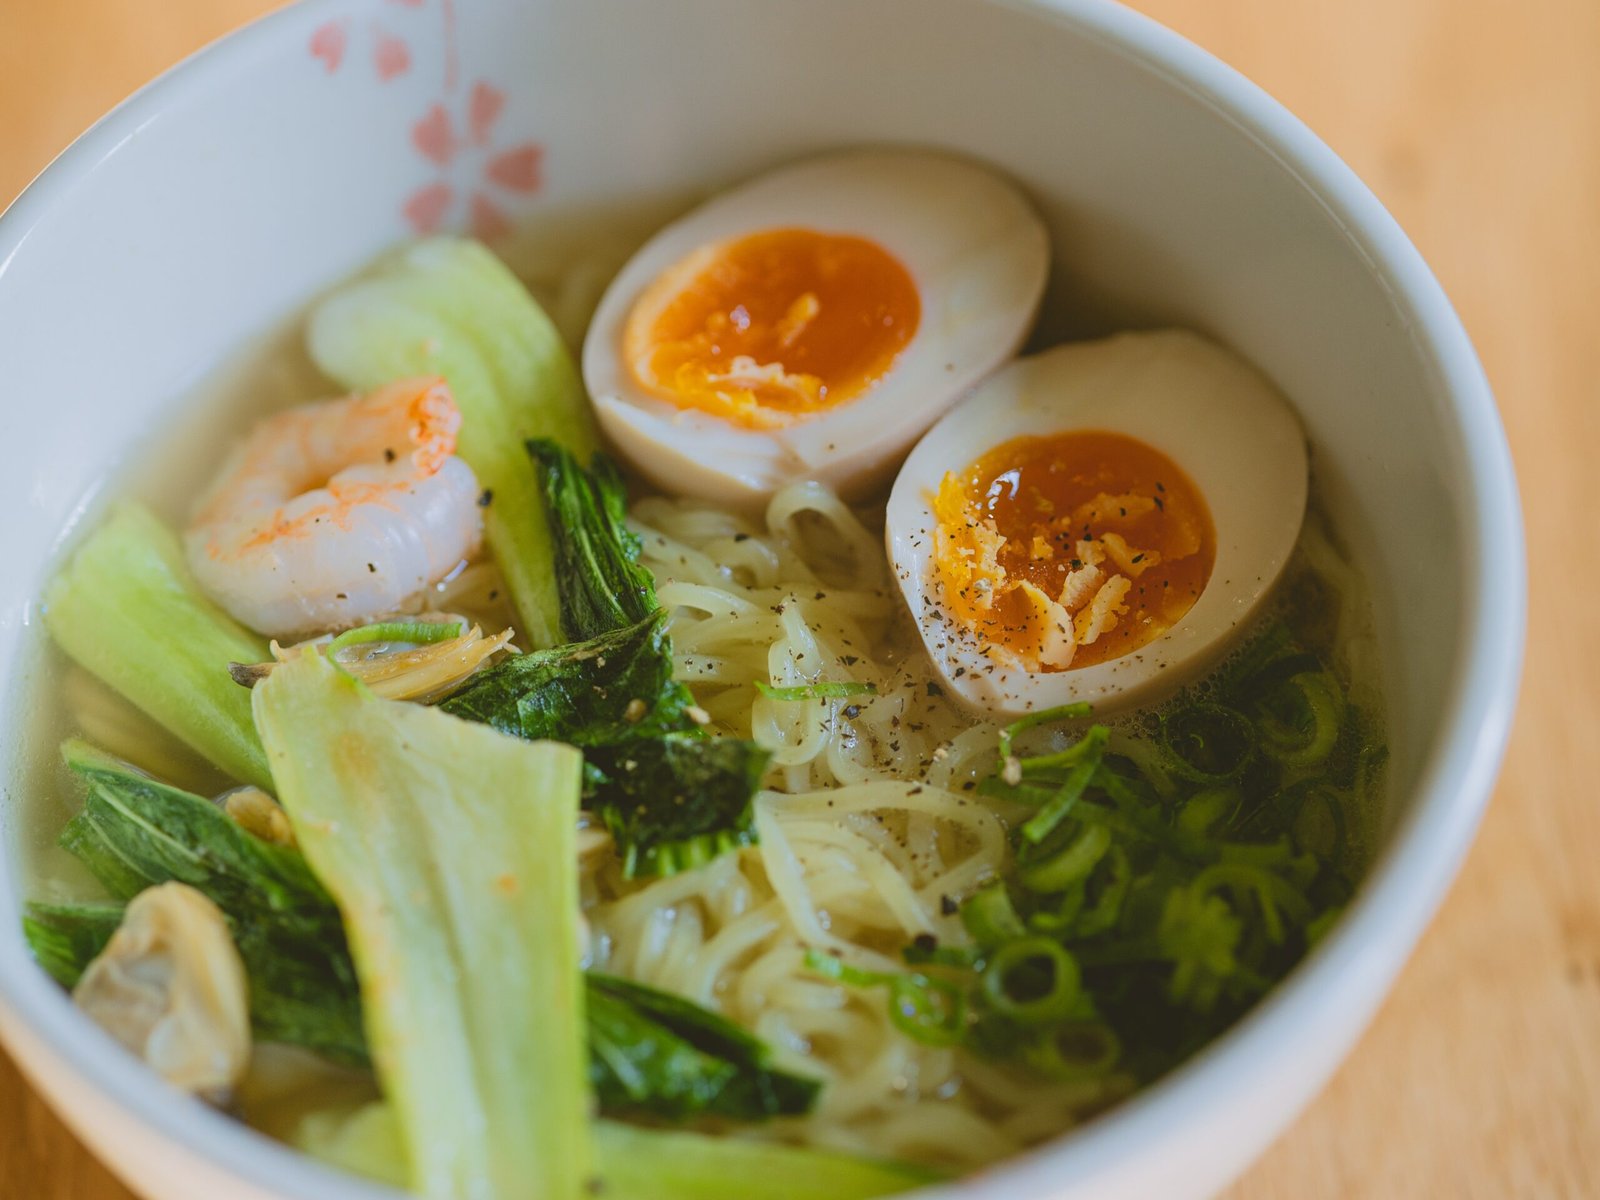 How Do You Add Eggs To 2-Minute Noodles?